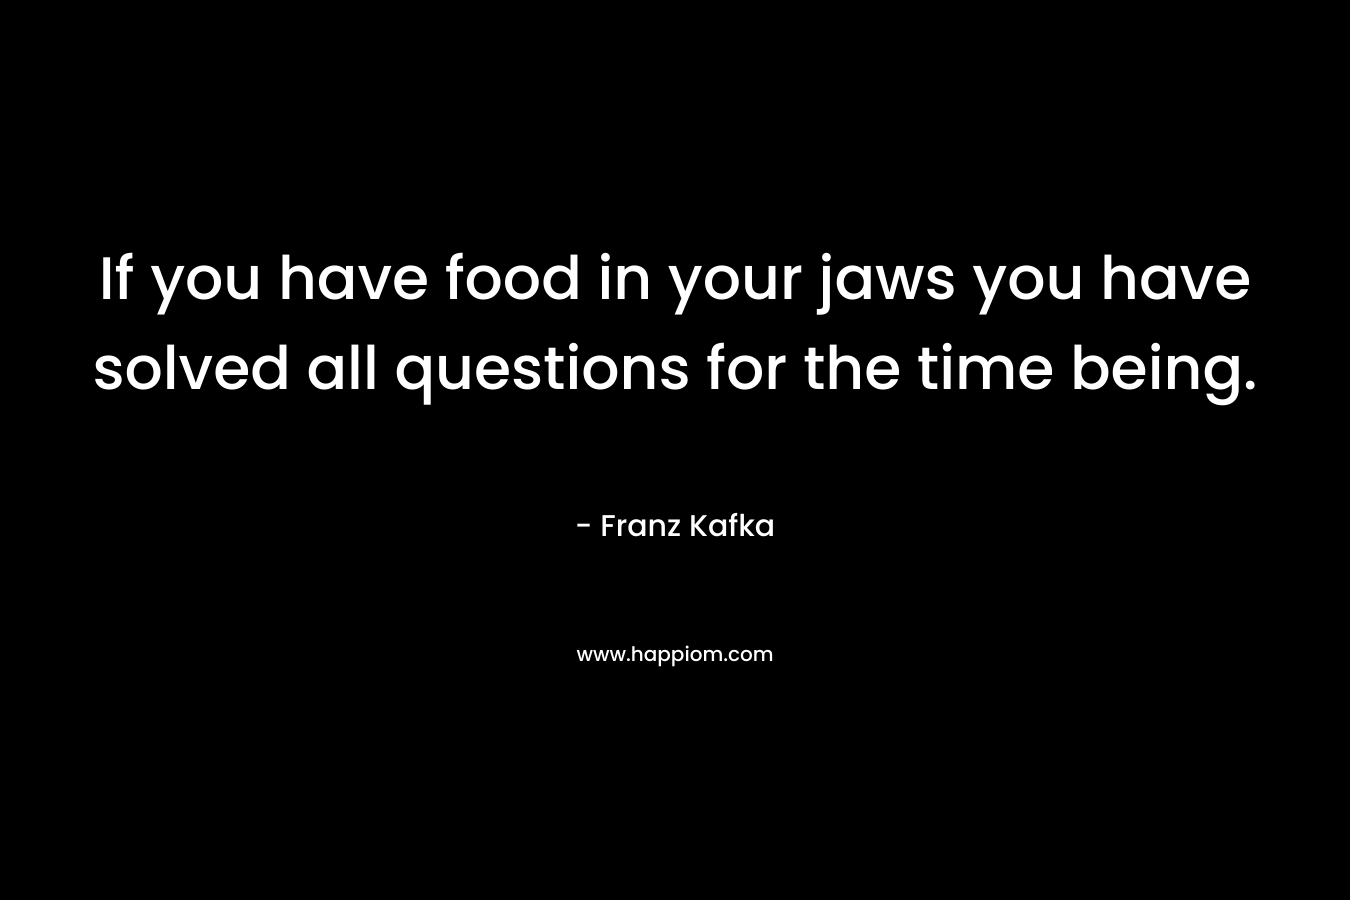 If you have food in your jaws you have solved all questions for the time being. – Franz Kafka